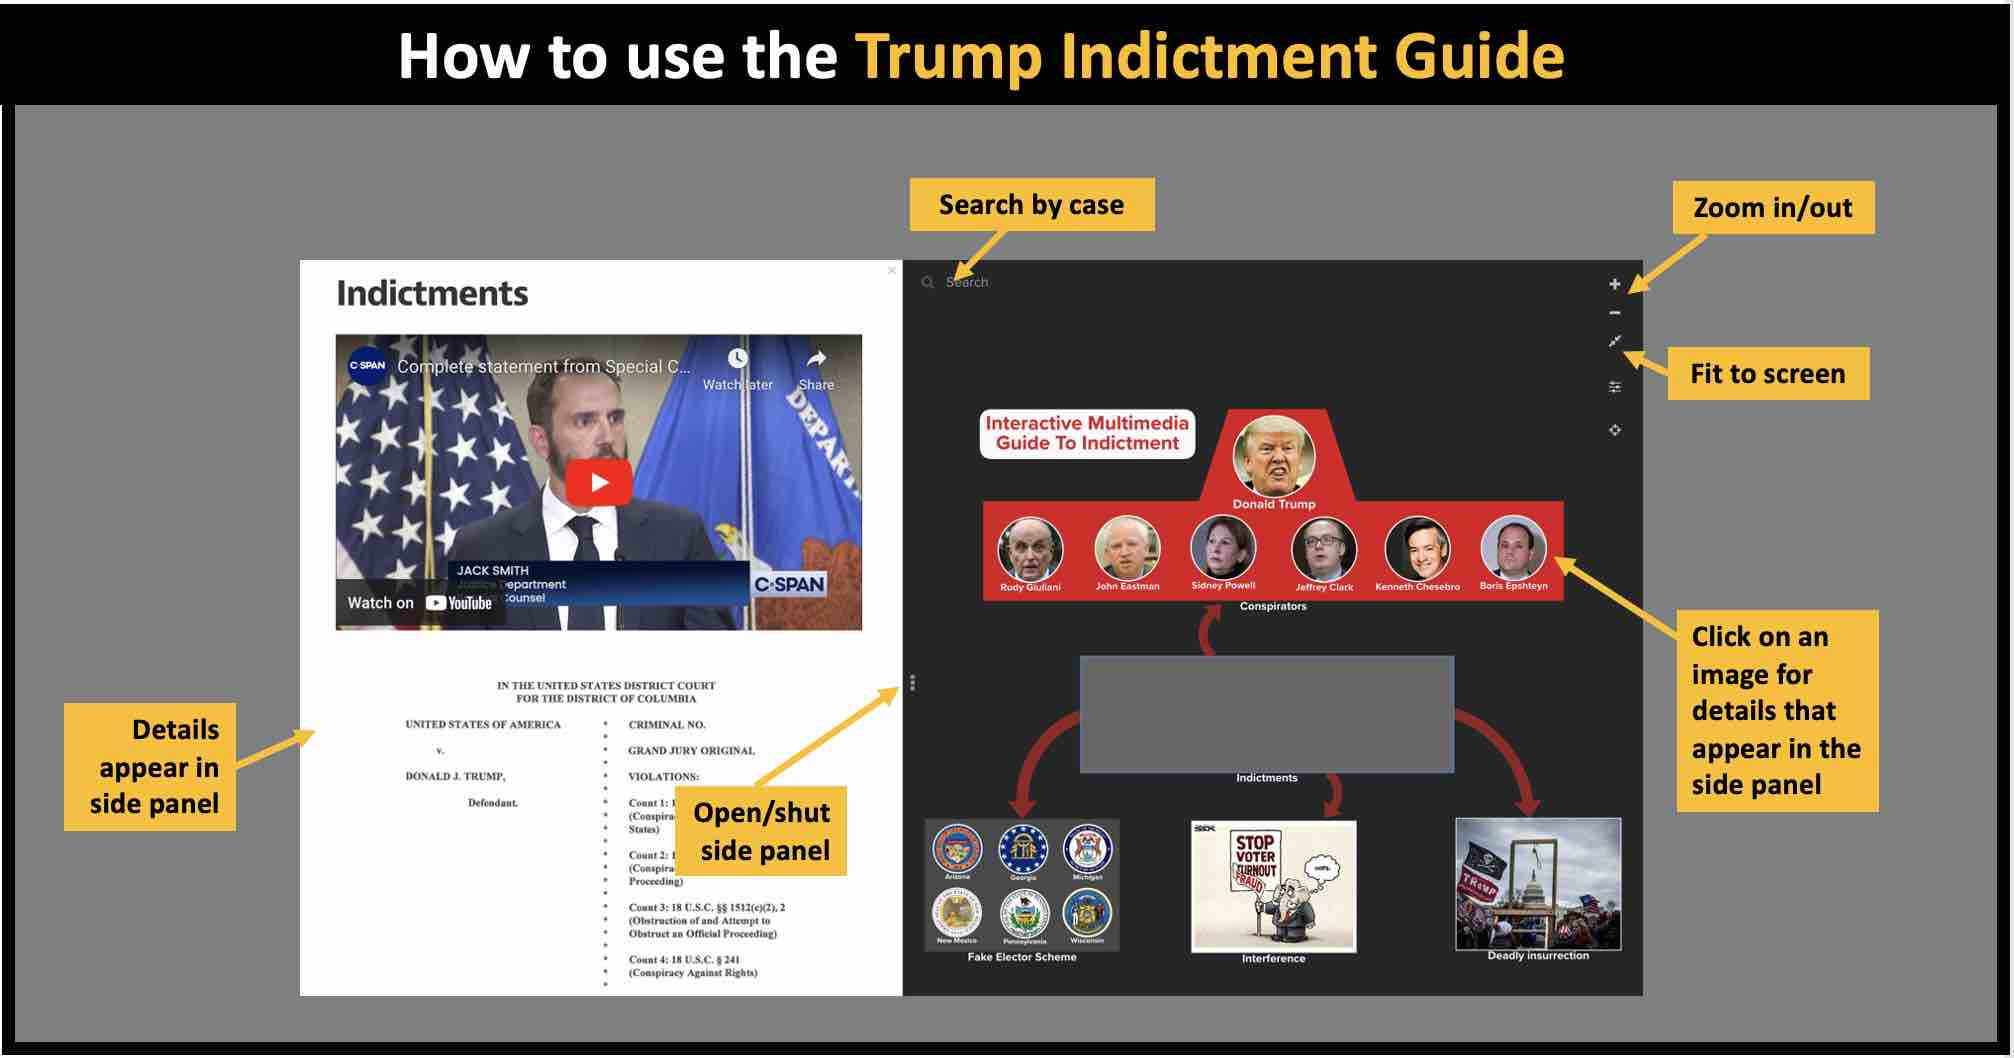 How to use the Trump Indictment Guide